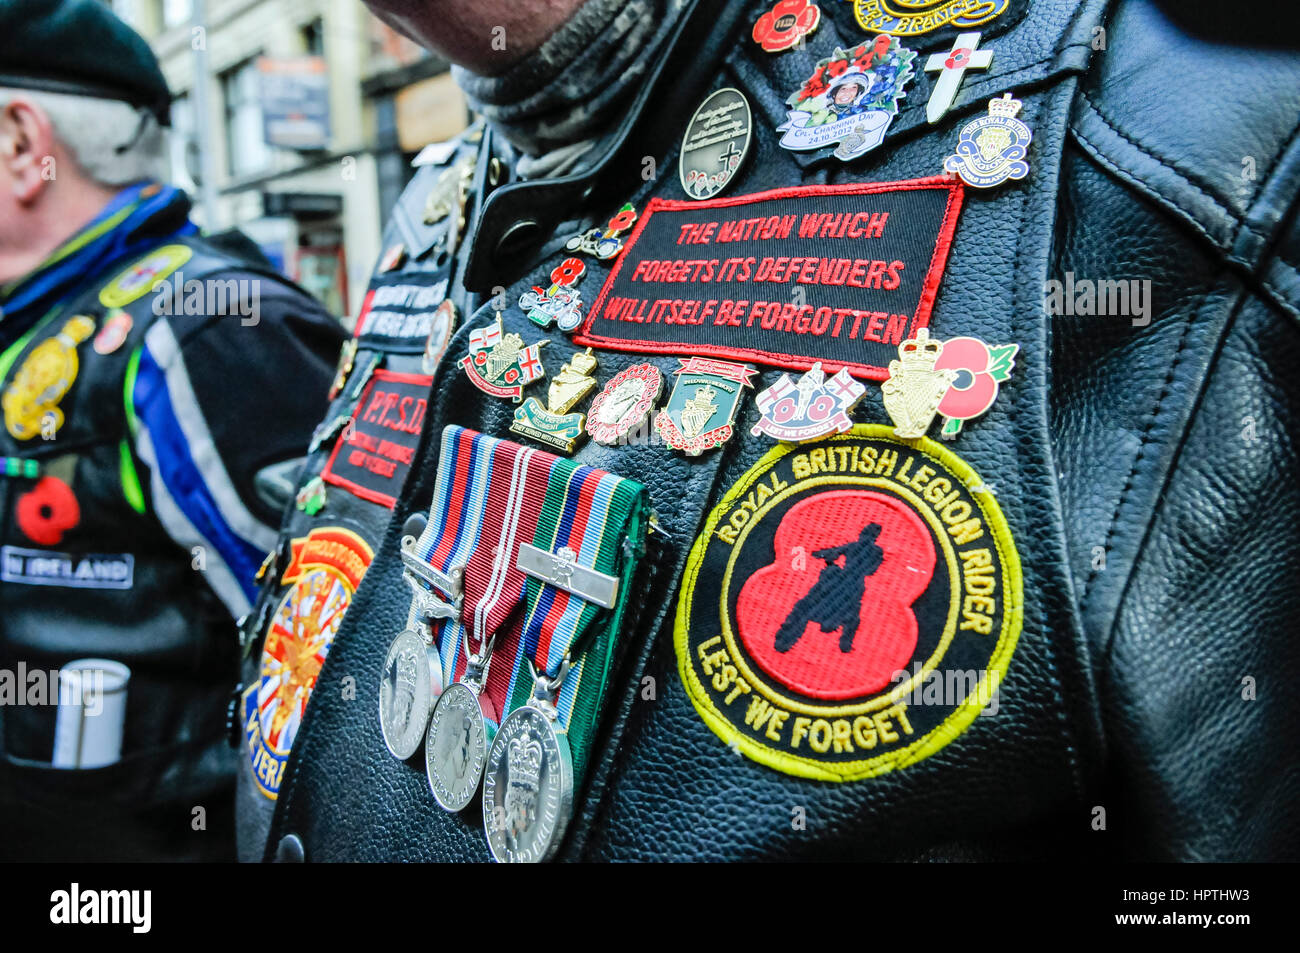 Belfast, Northern Ireland. 25 Feb 2017 - A former soldier wears a leather motorcycle jacket with medals, badges and patches in support of serving and ex-troops. Stock Photo